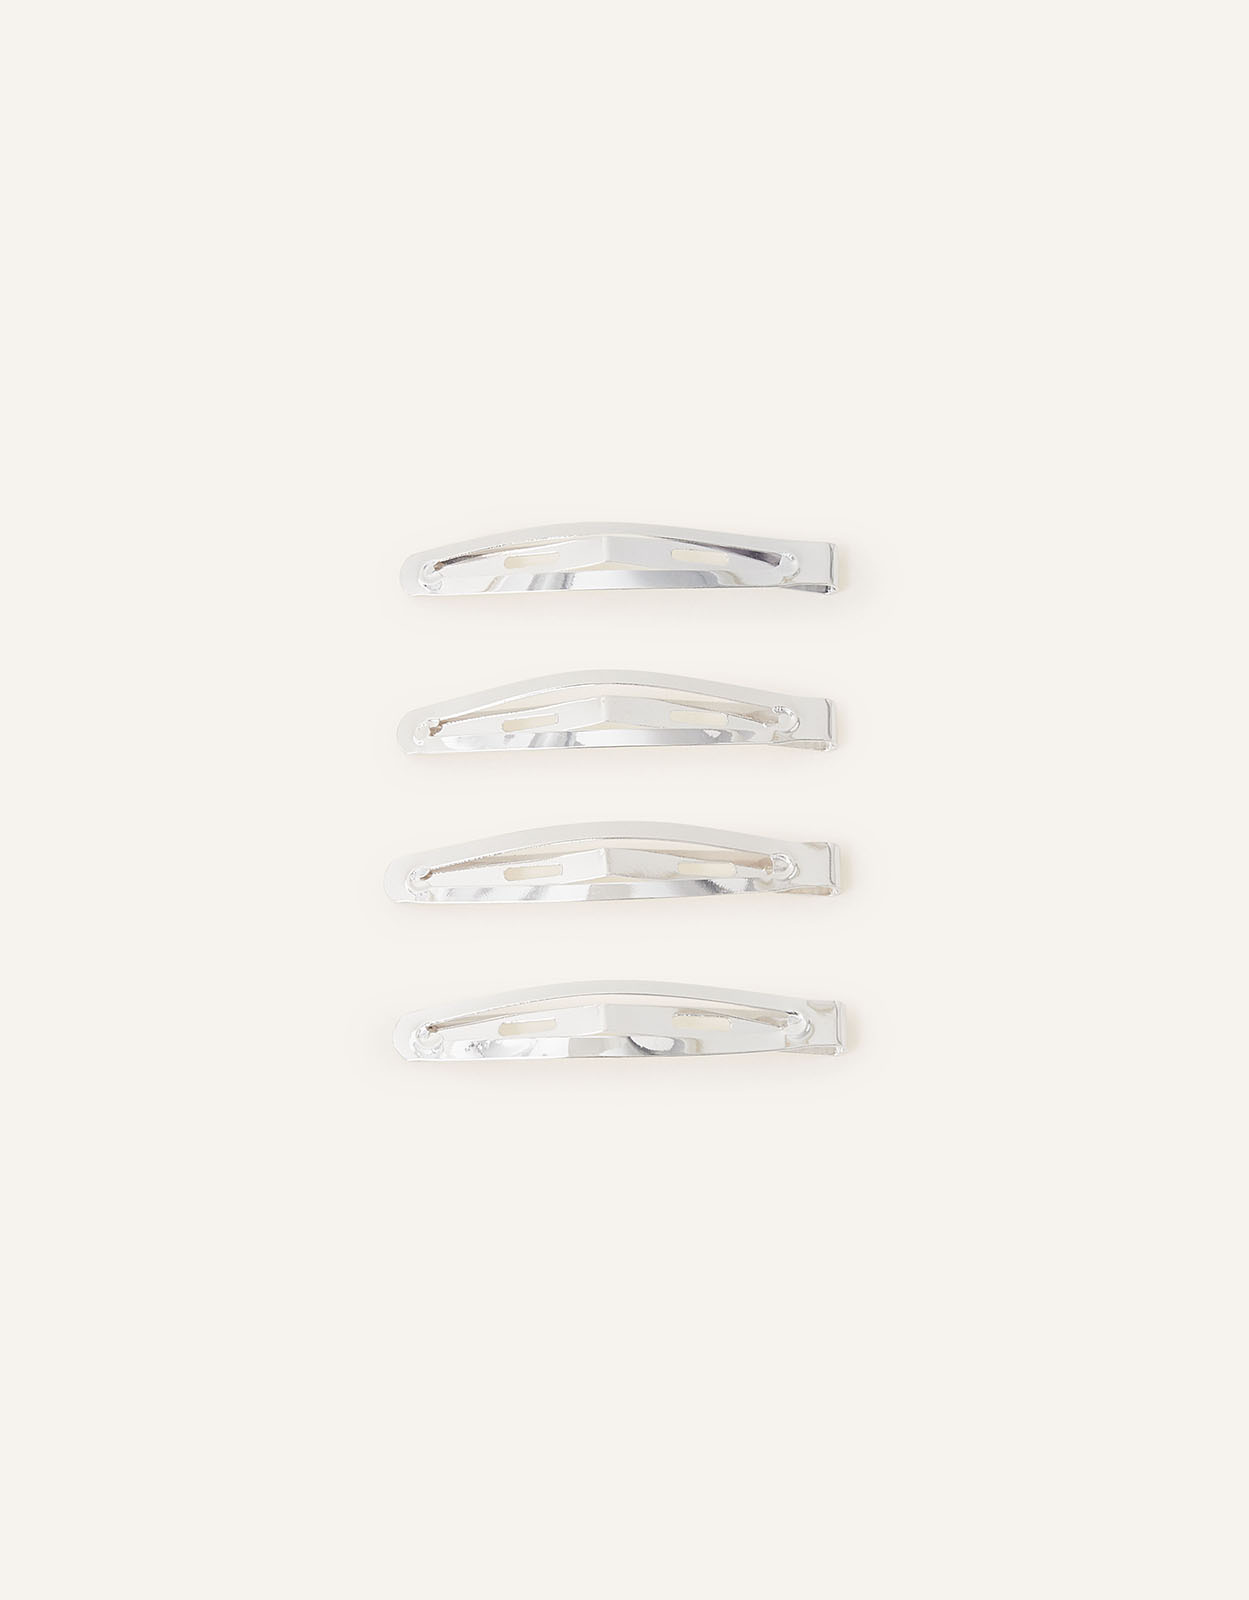 Accessorize Women's Metal Snap Hair Clips 4 Pack Silver, Size: 6cm